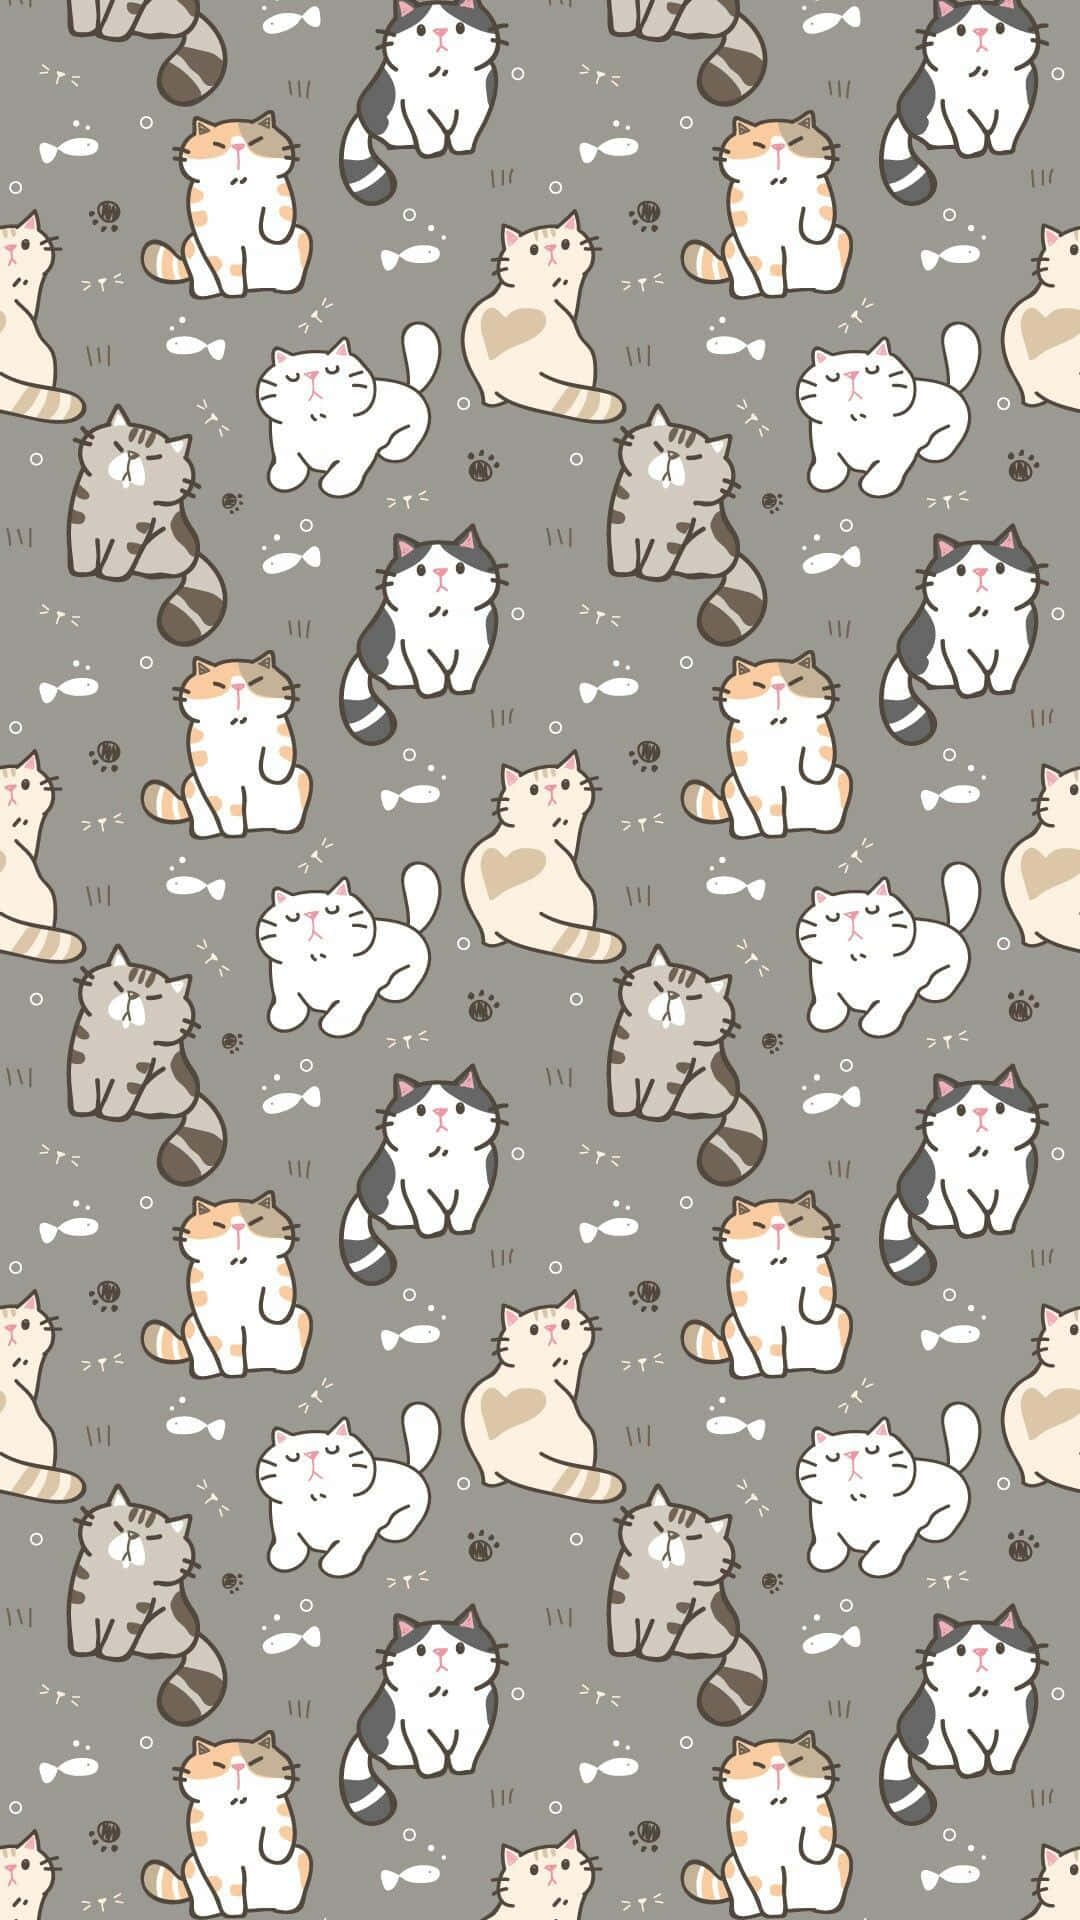 A background covered with cute cat pattern to brighten your day! Wallpaper